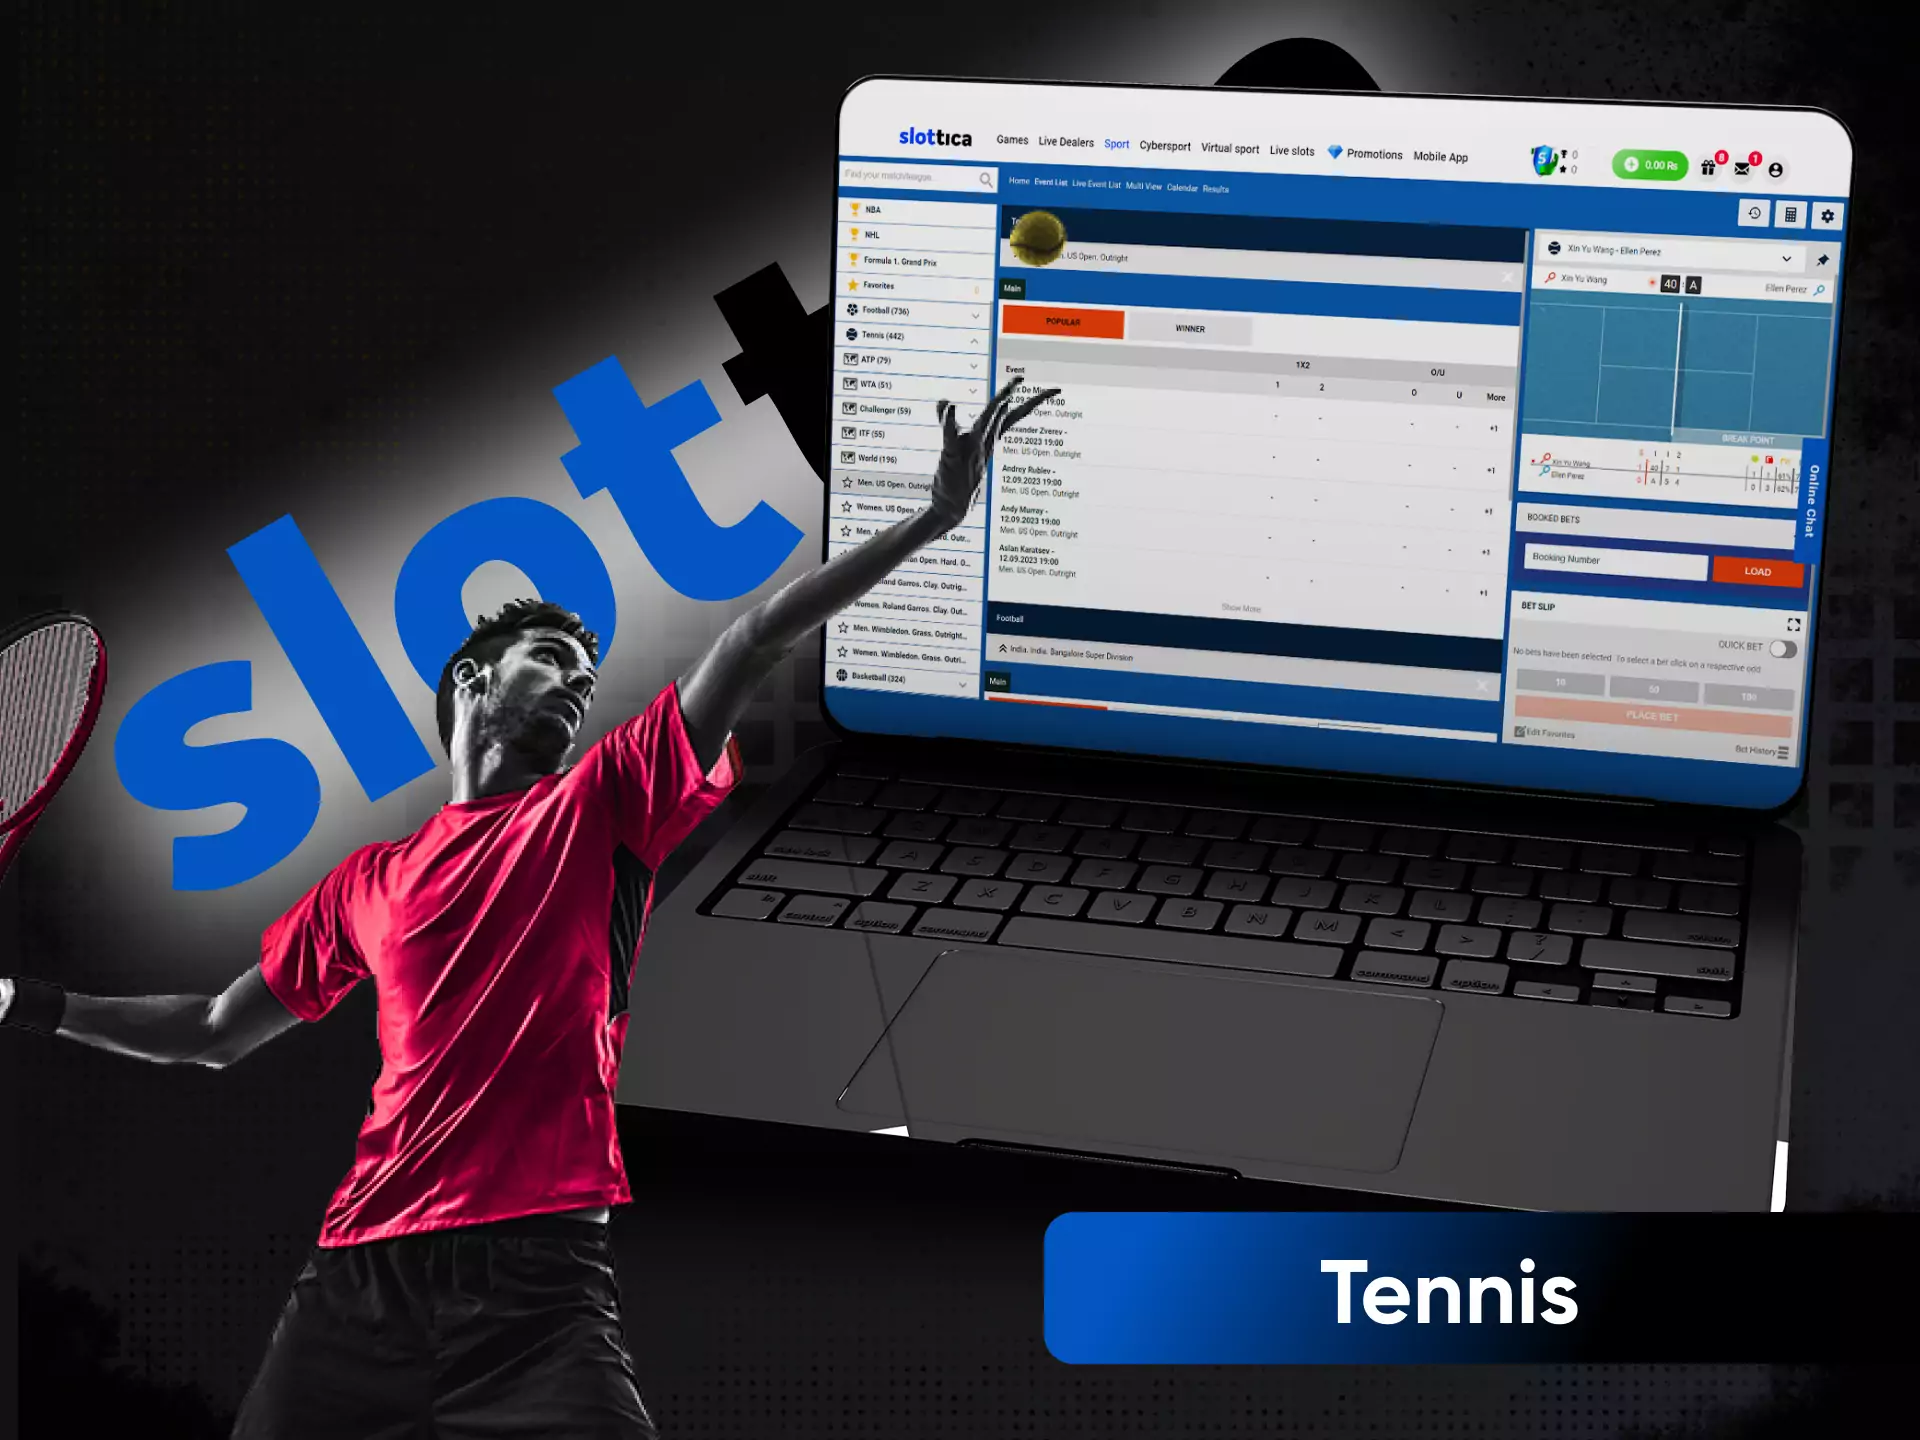 On the Slottica website, you can follow and place bets on tennis championships.